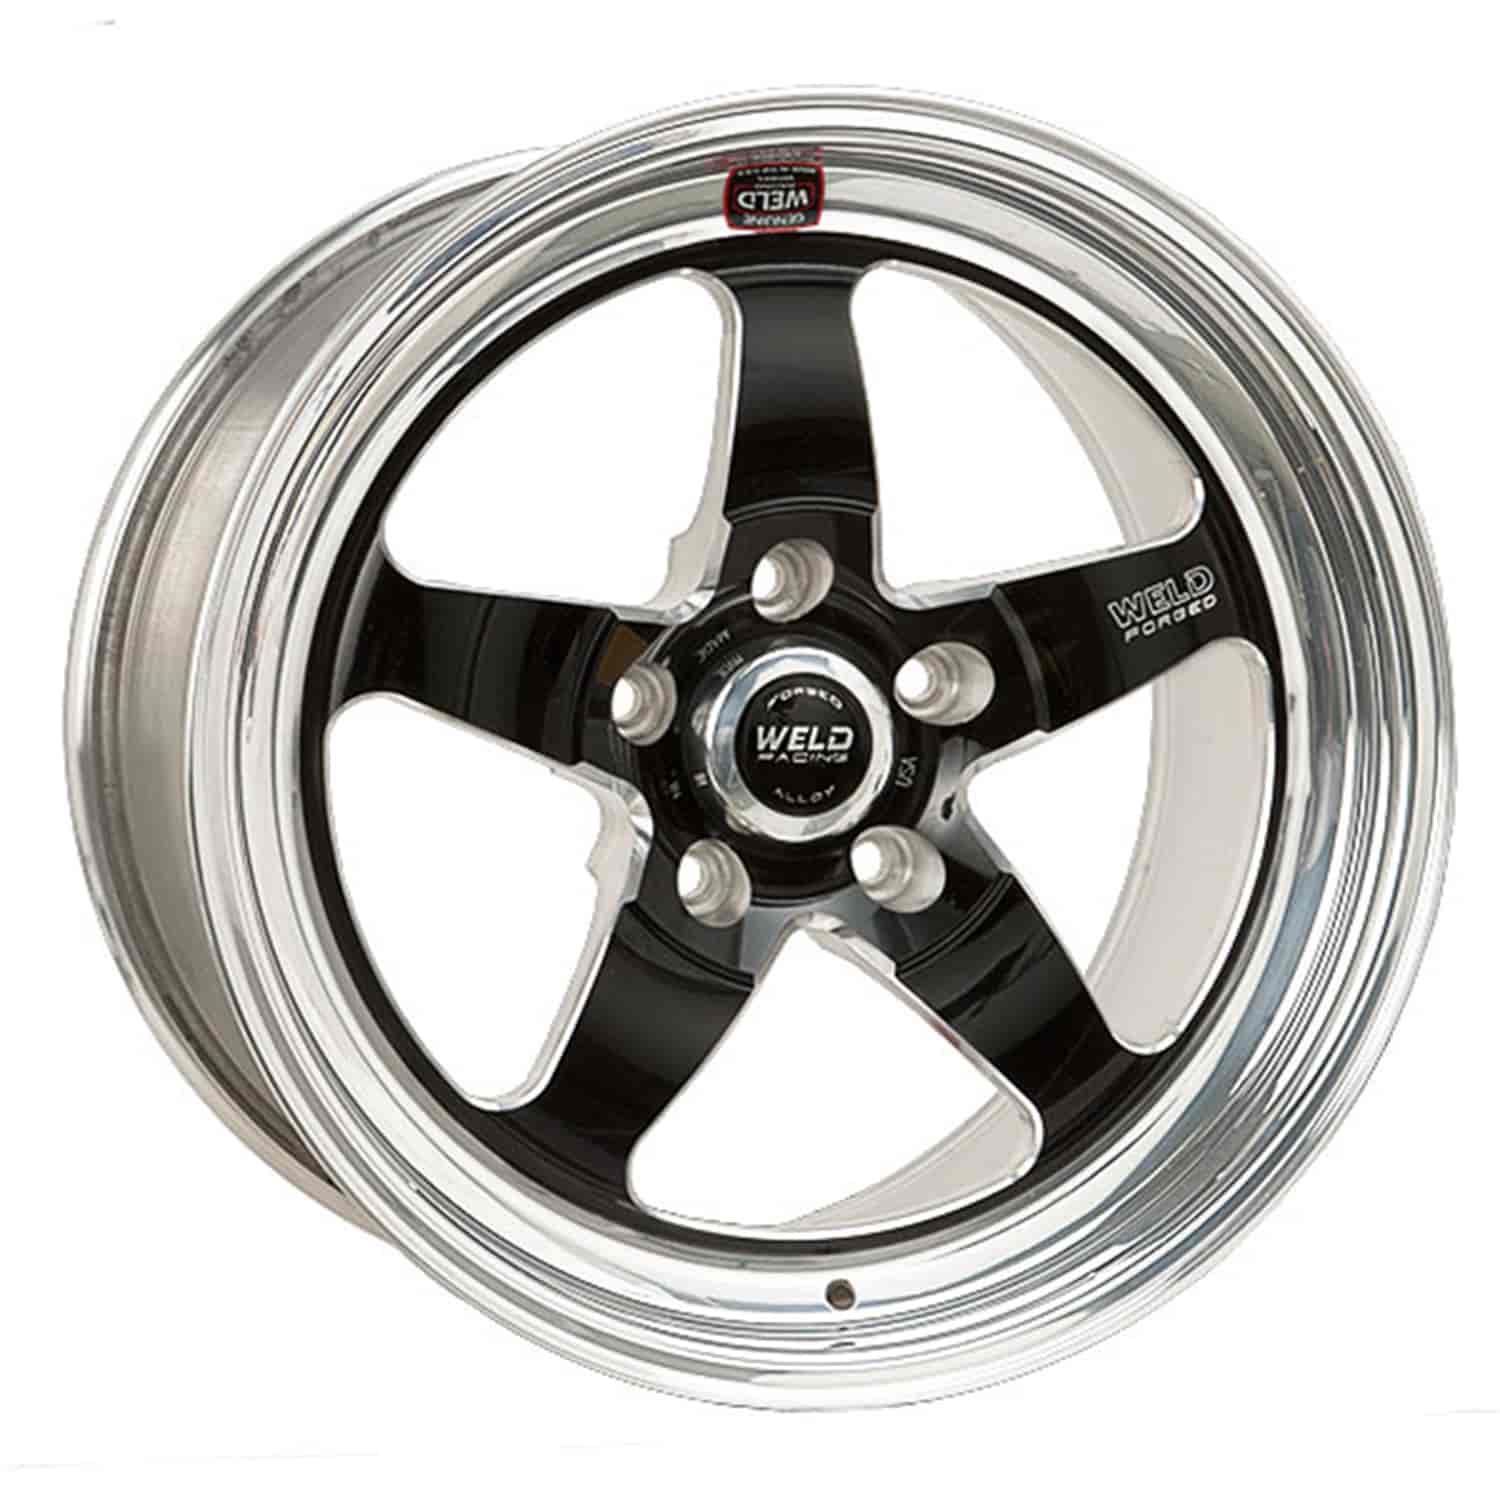 RT-S Series Wheel Size: 15" x 4" Bolt Circle: 5 x 4-1/2" Back Space: 1-1/2"